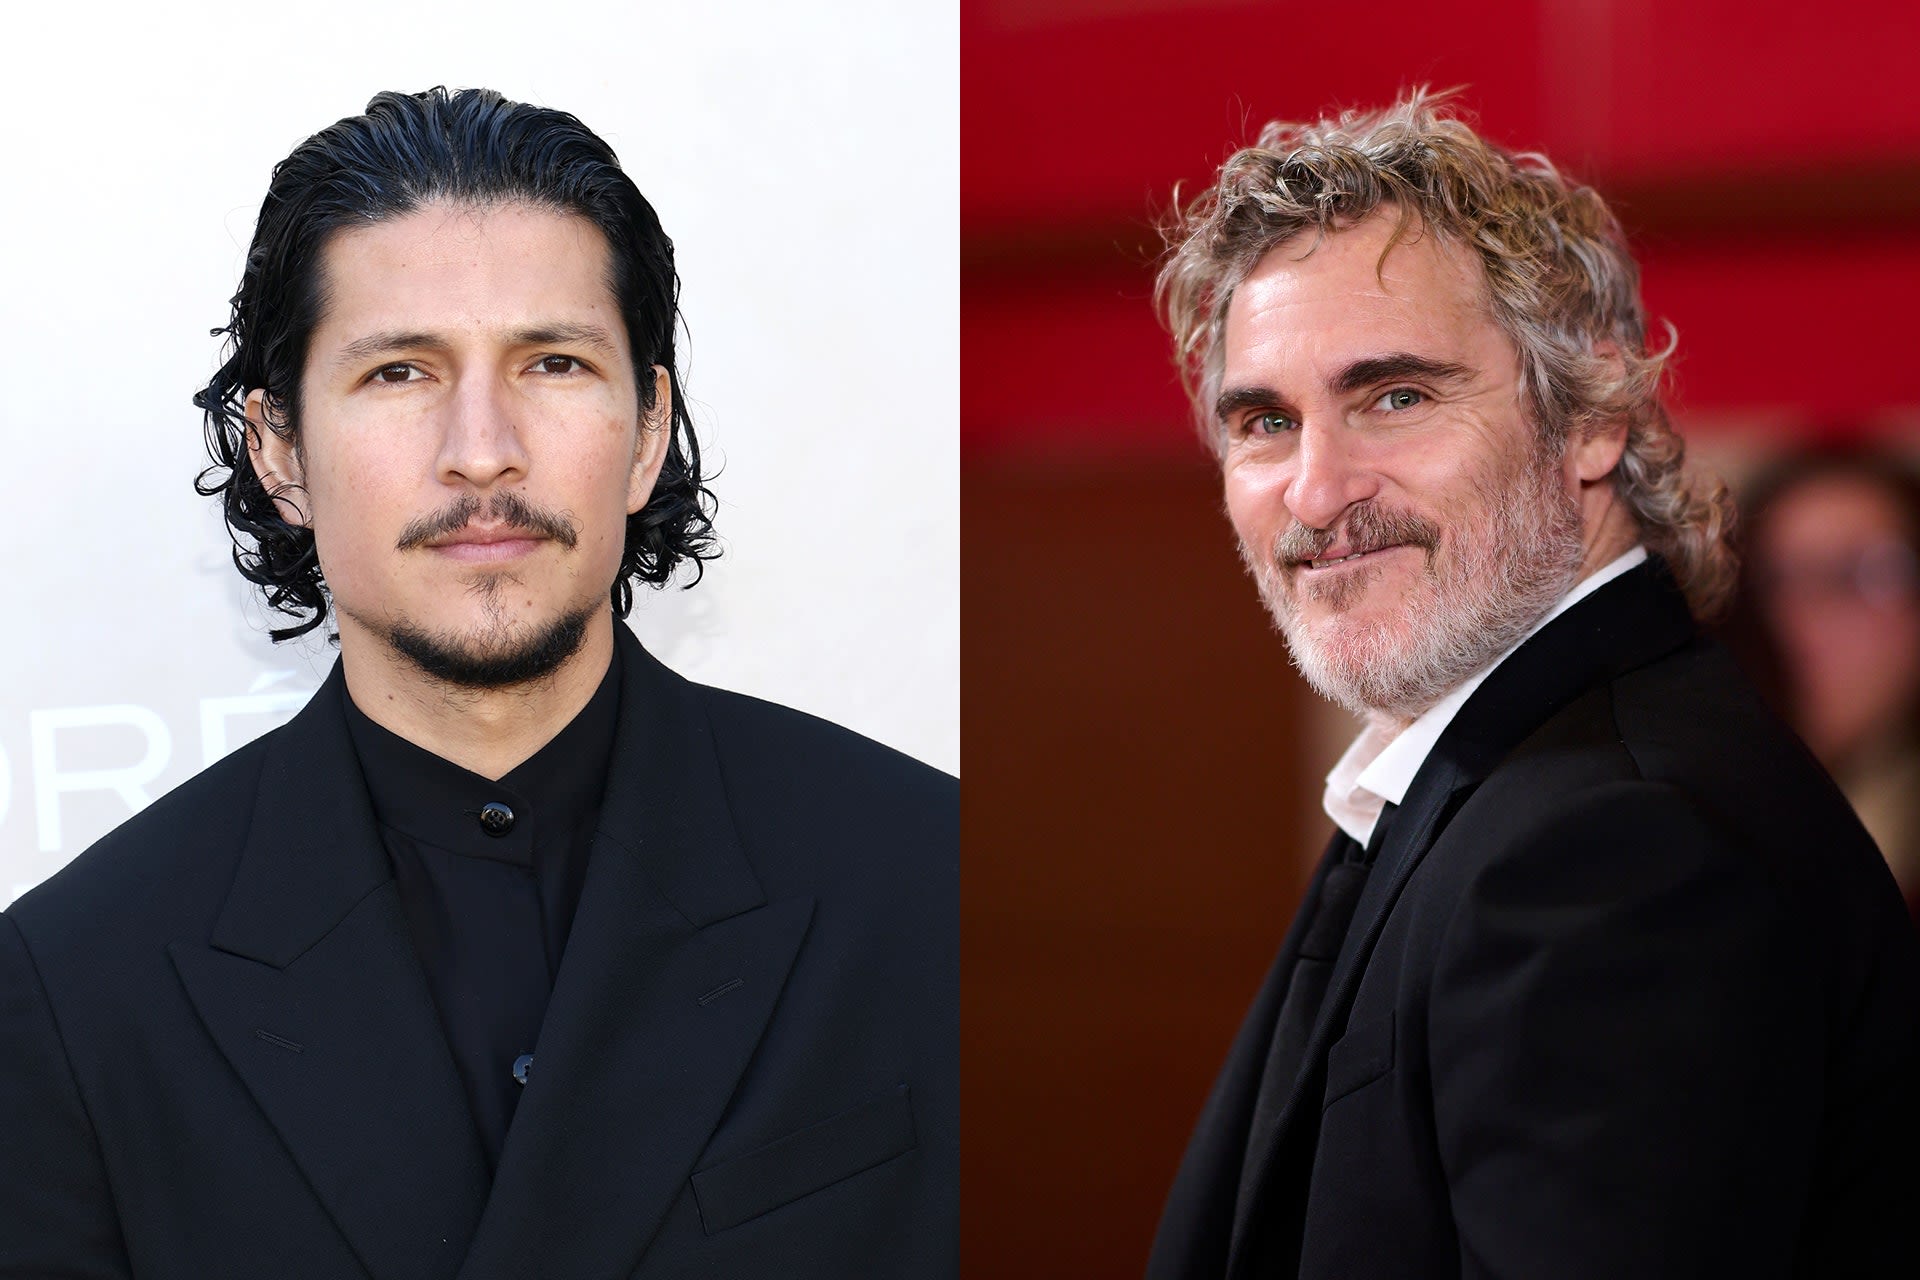 The Carol Director’s Next Movie Will Be a Gay Detective Story Starring Joaquin Phoenix